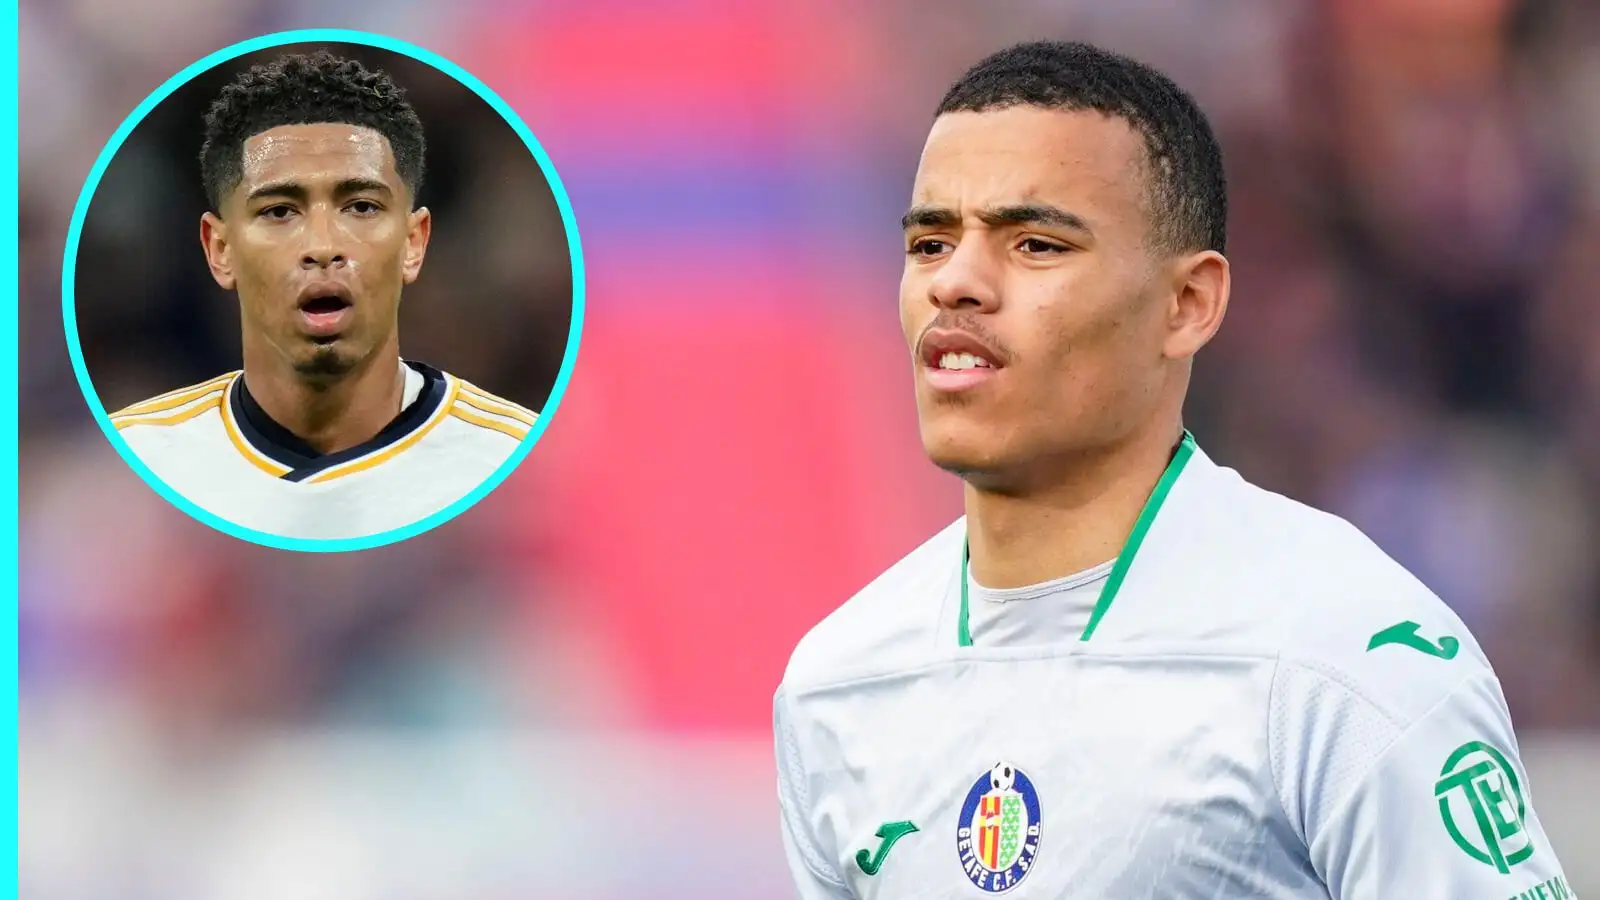 Mason Greenwood ‘wants Jude Bellingham investigation’ dropped as he ‘doesn’t want bad publicity’